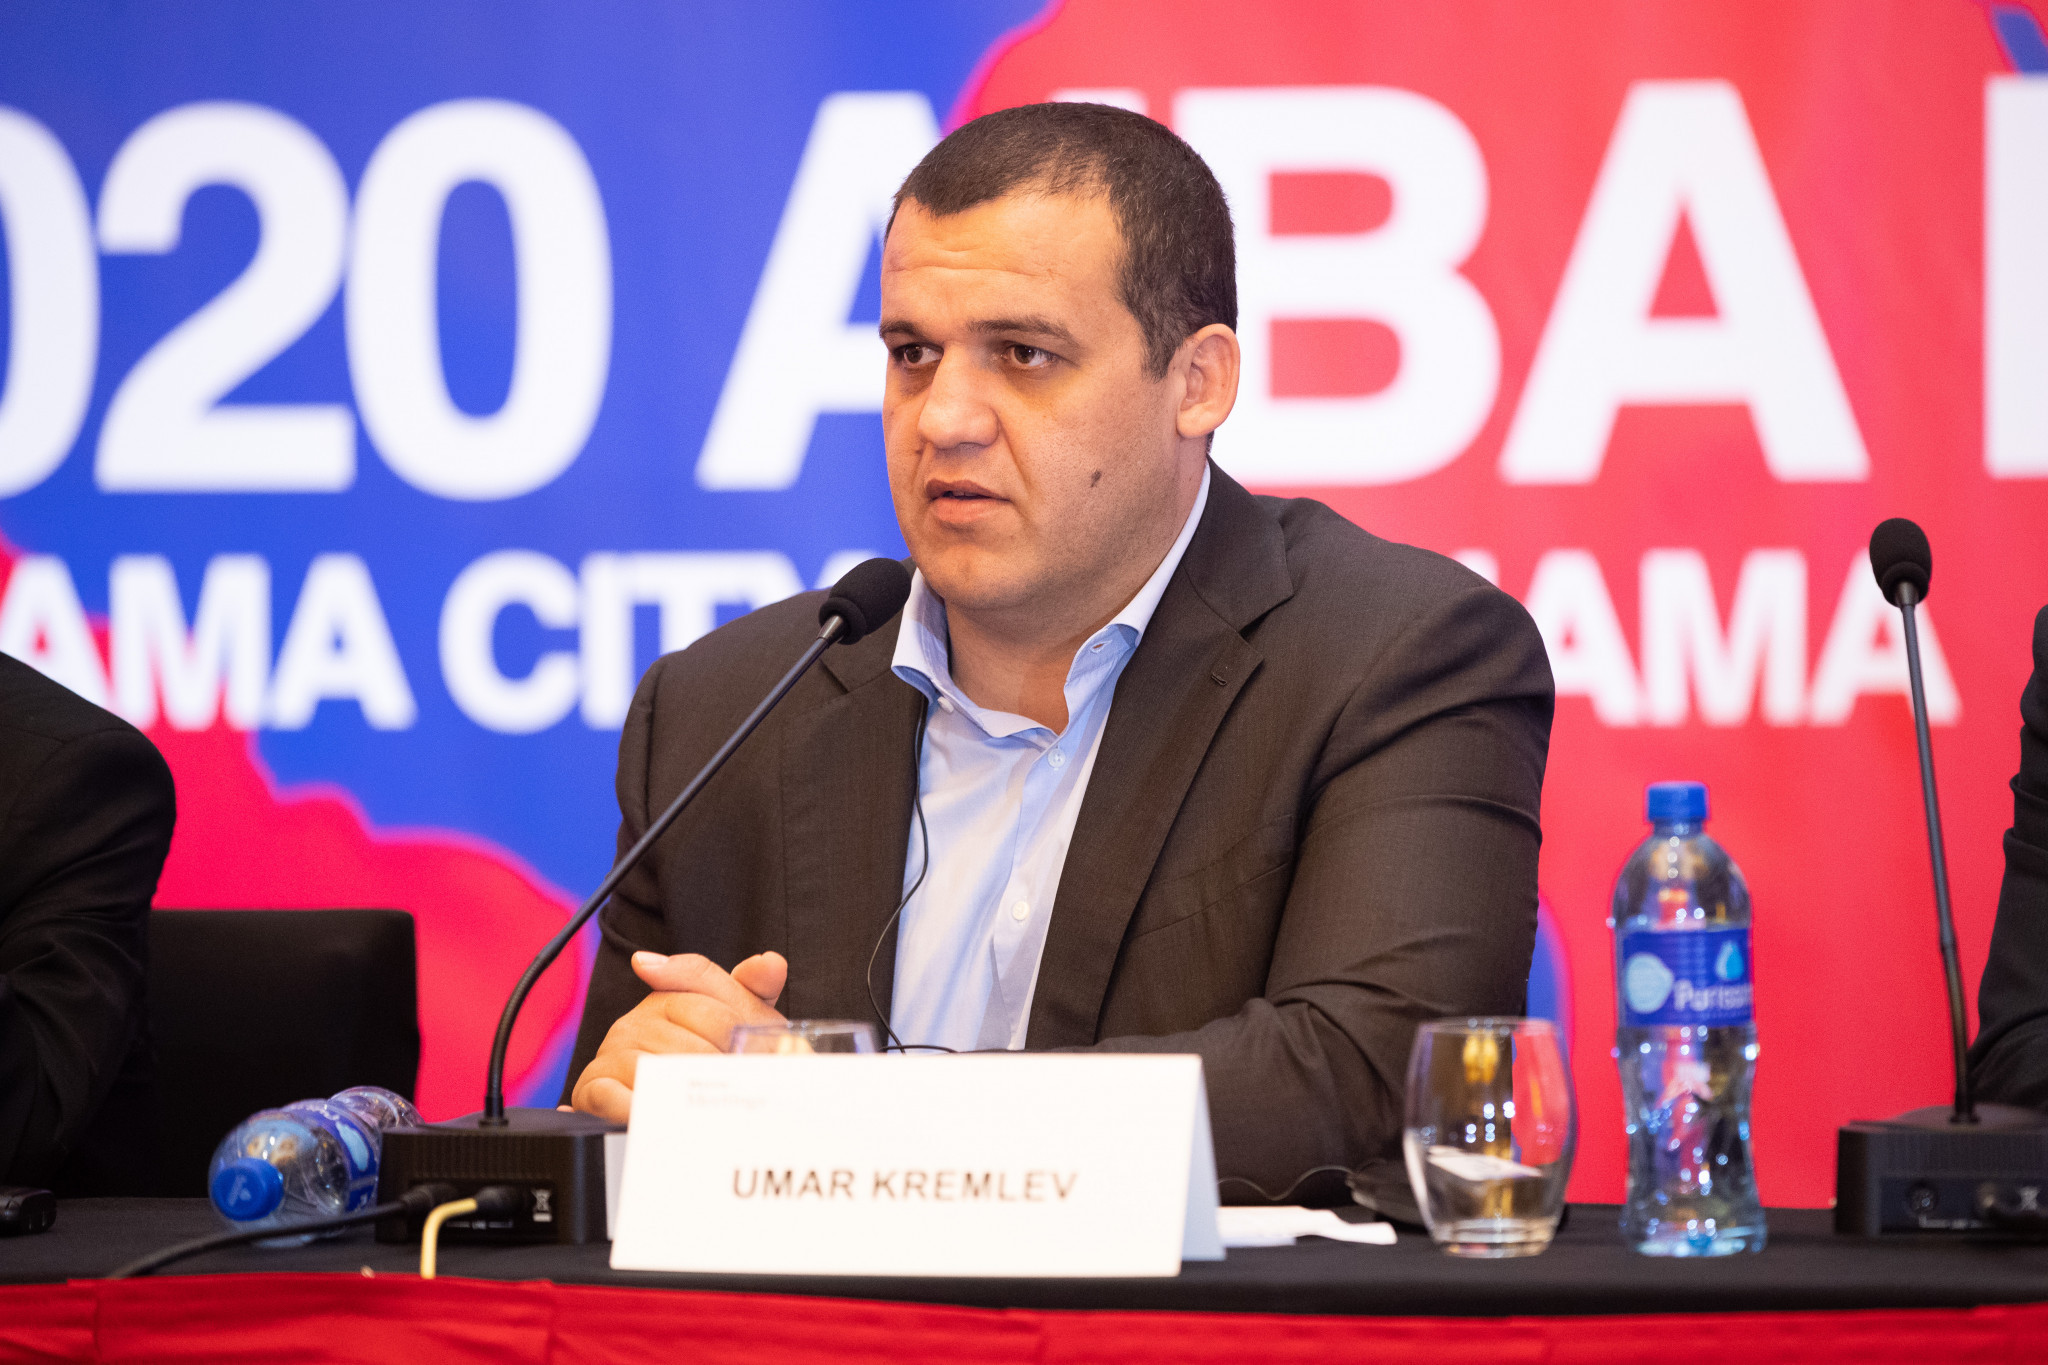 new aiba chief eyes reforms